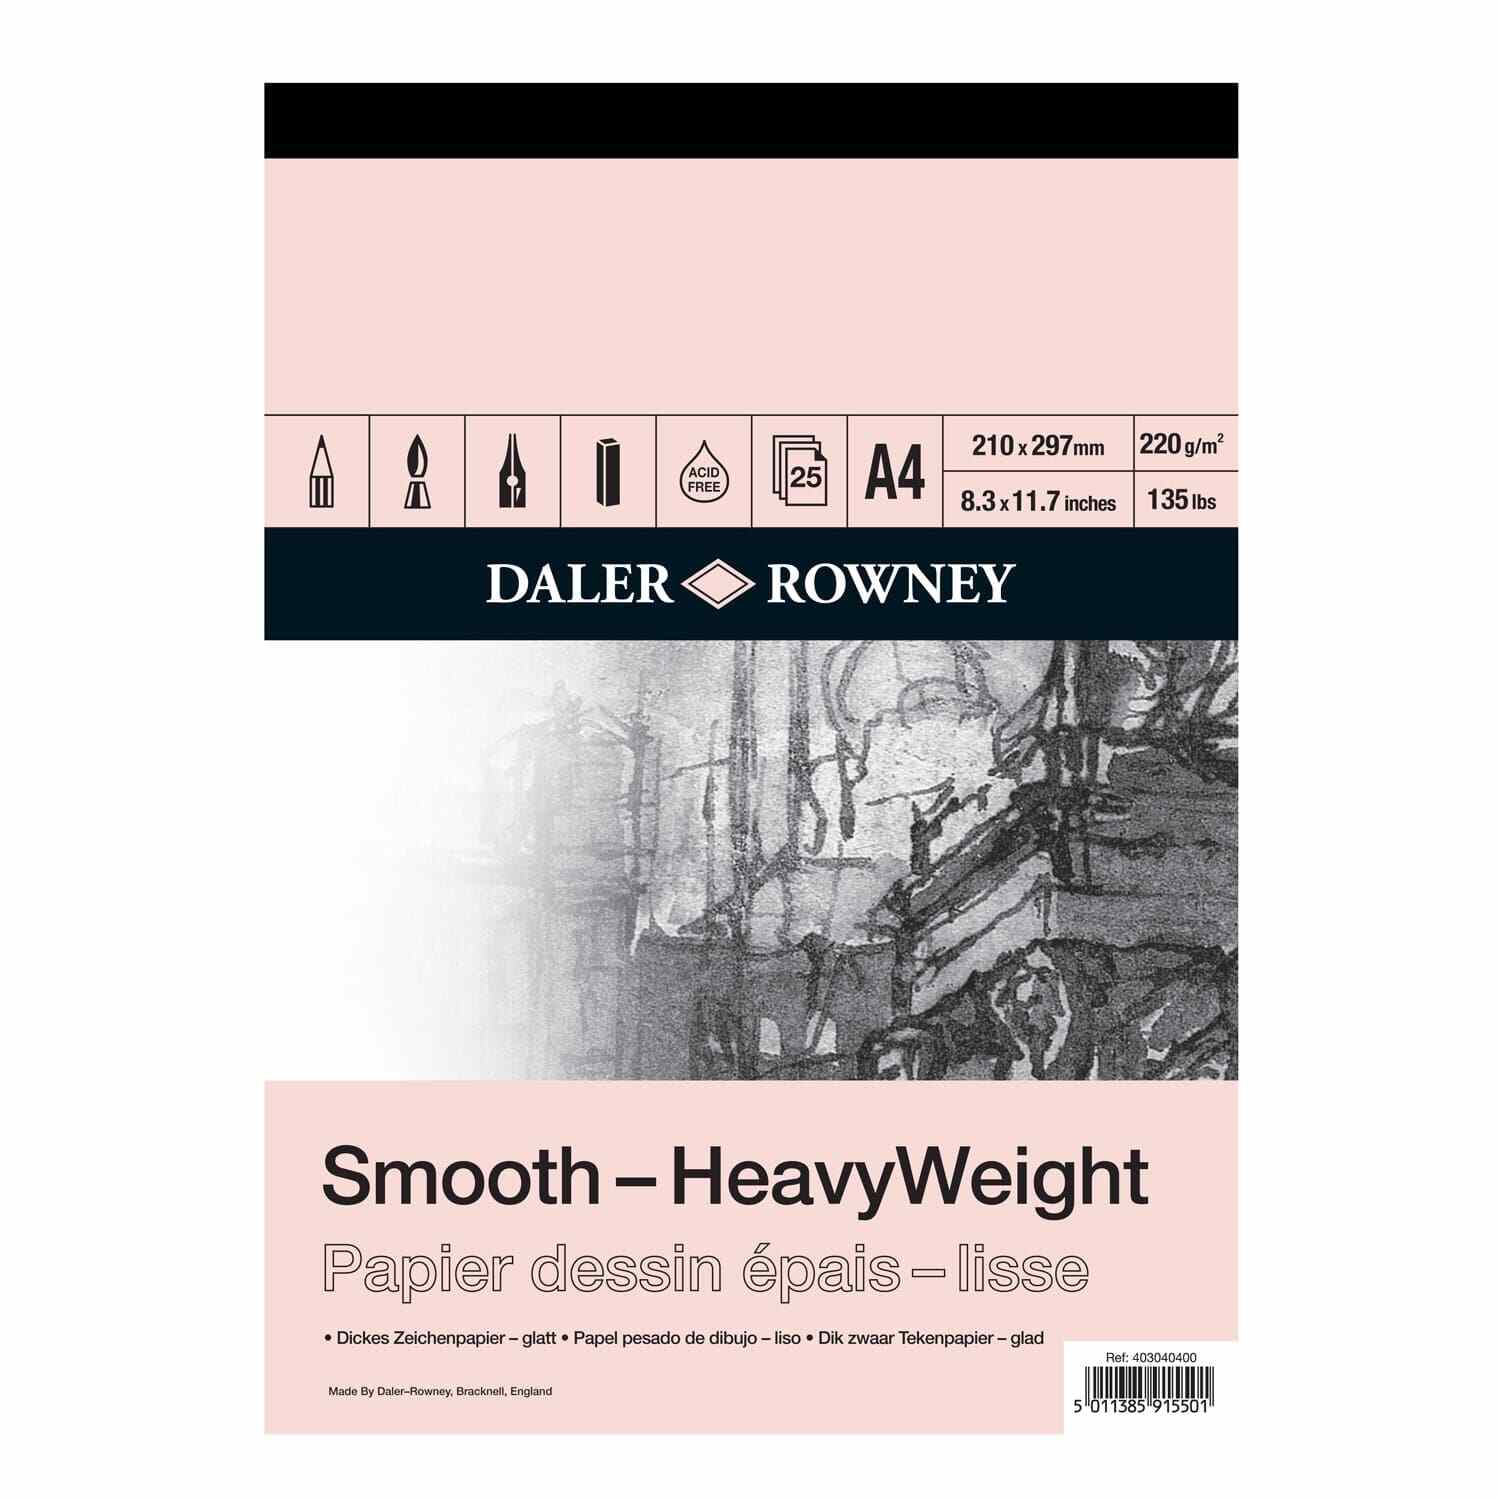 Daler Rowney Smooth Heavyweight Pad 220gsm 25 Sheets